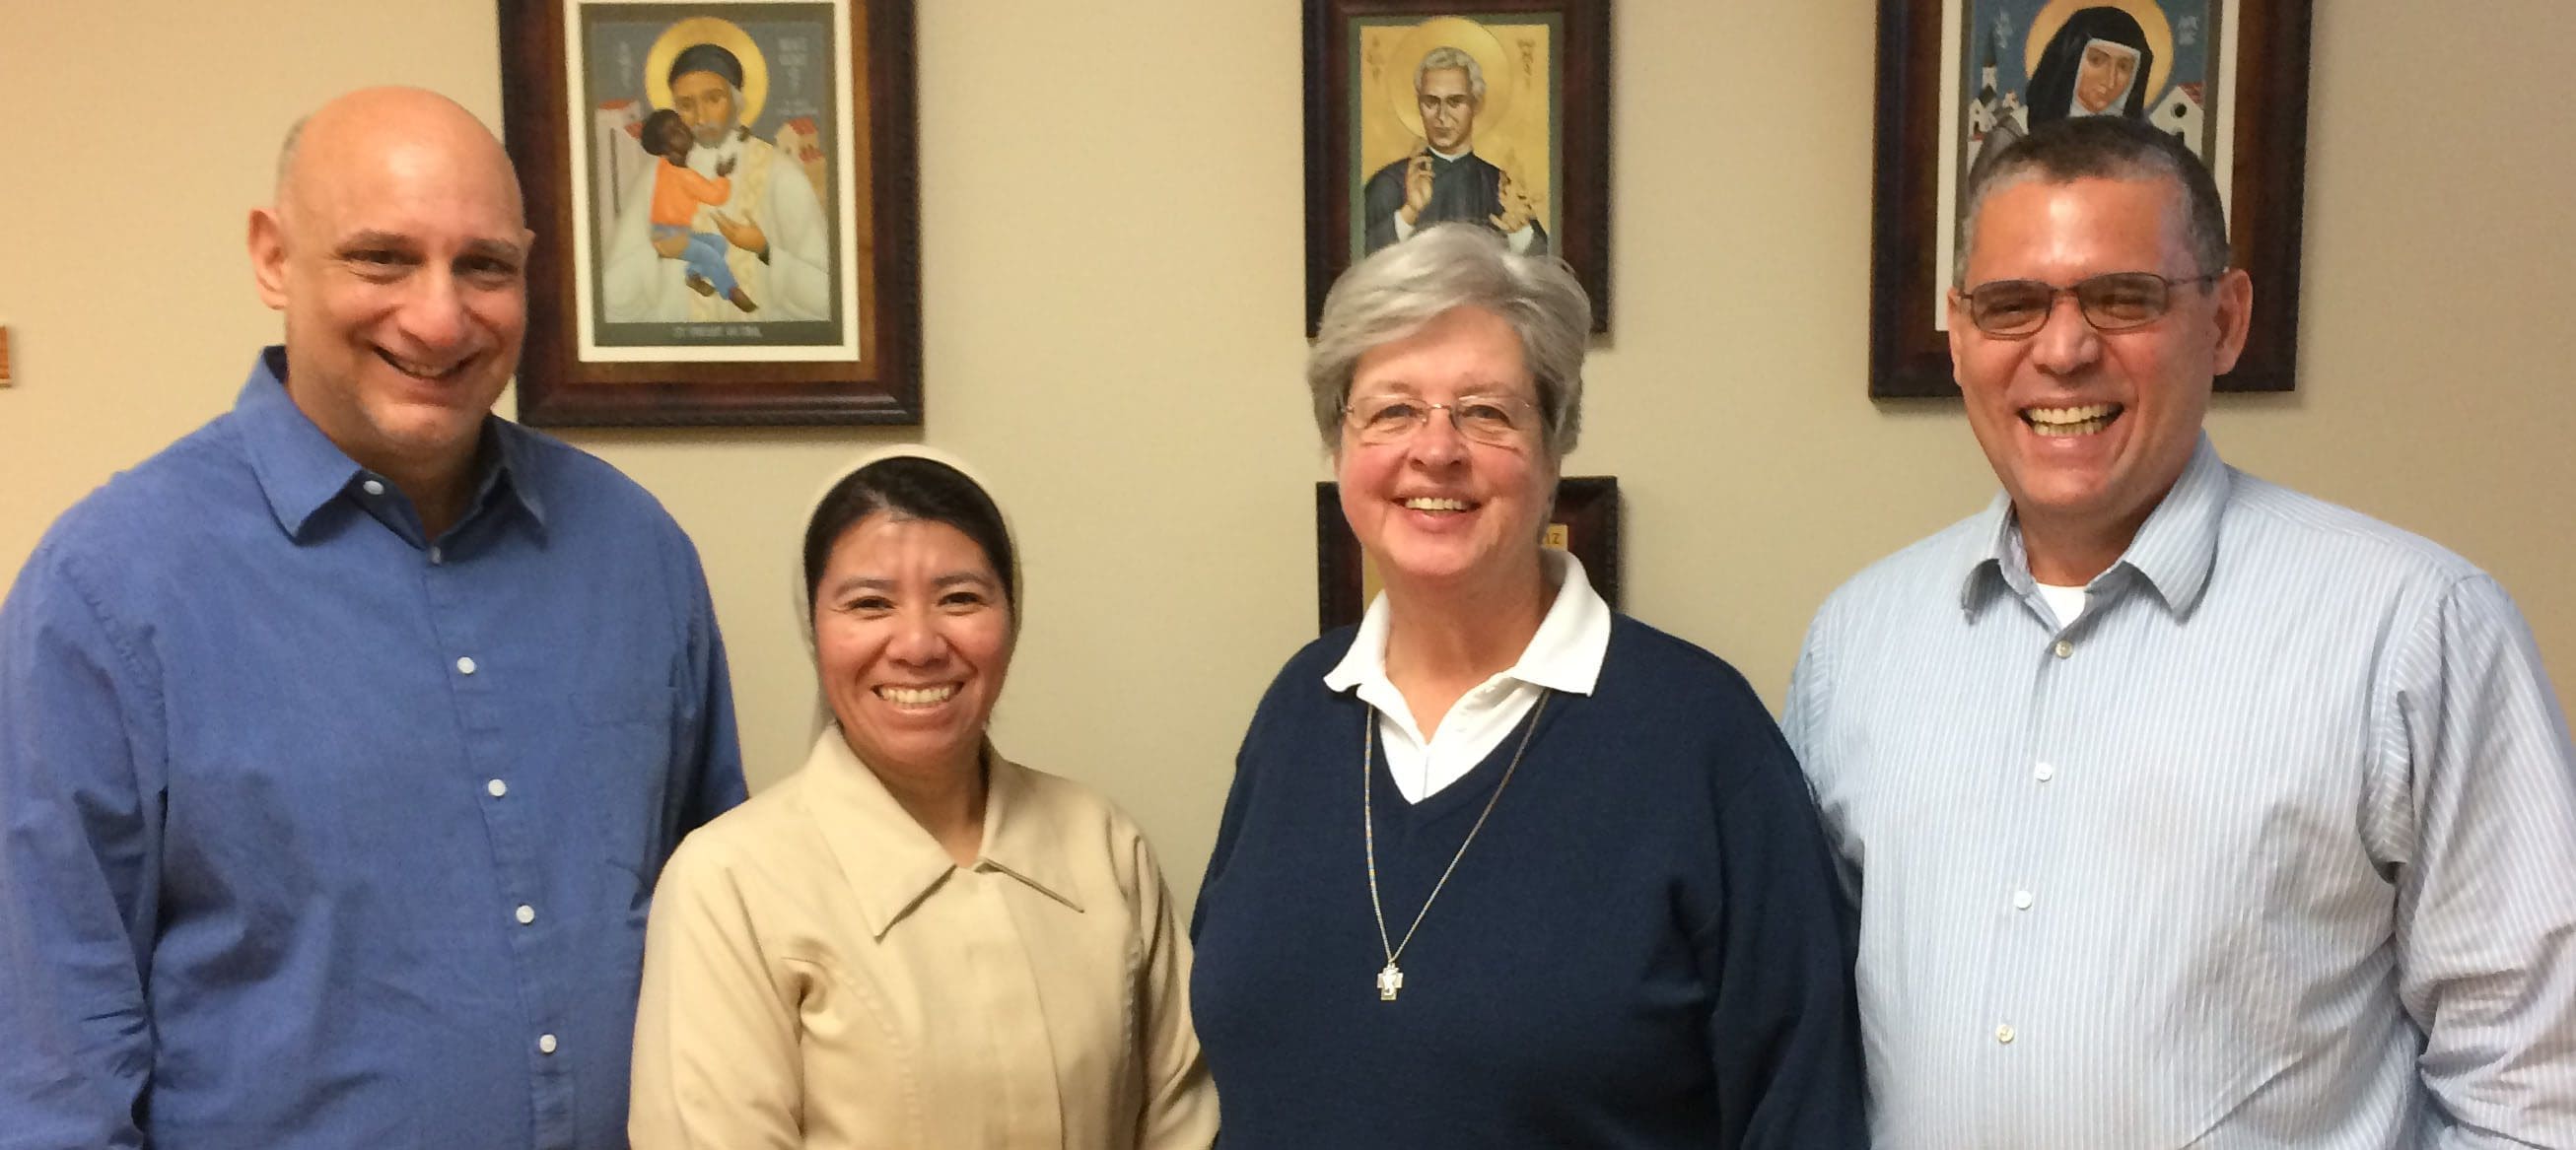 Getting to know the team of the Vincentian Family Office